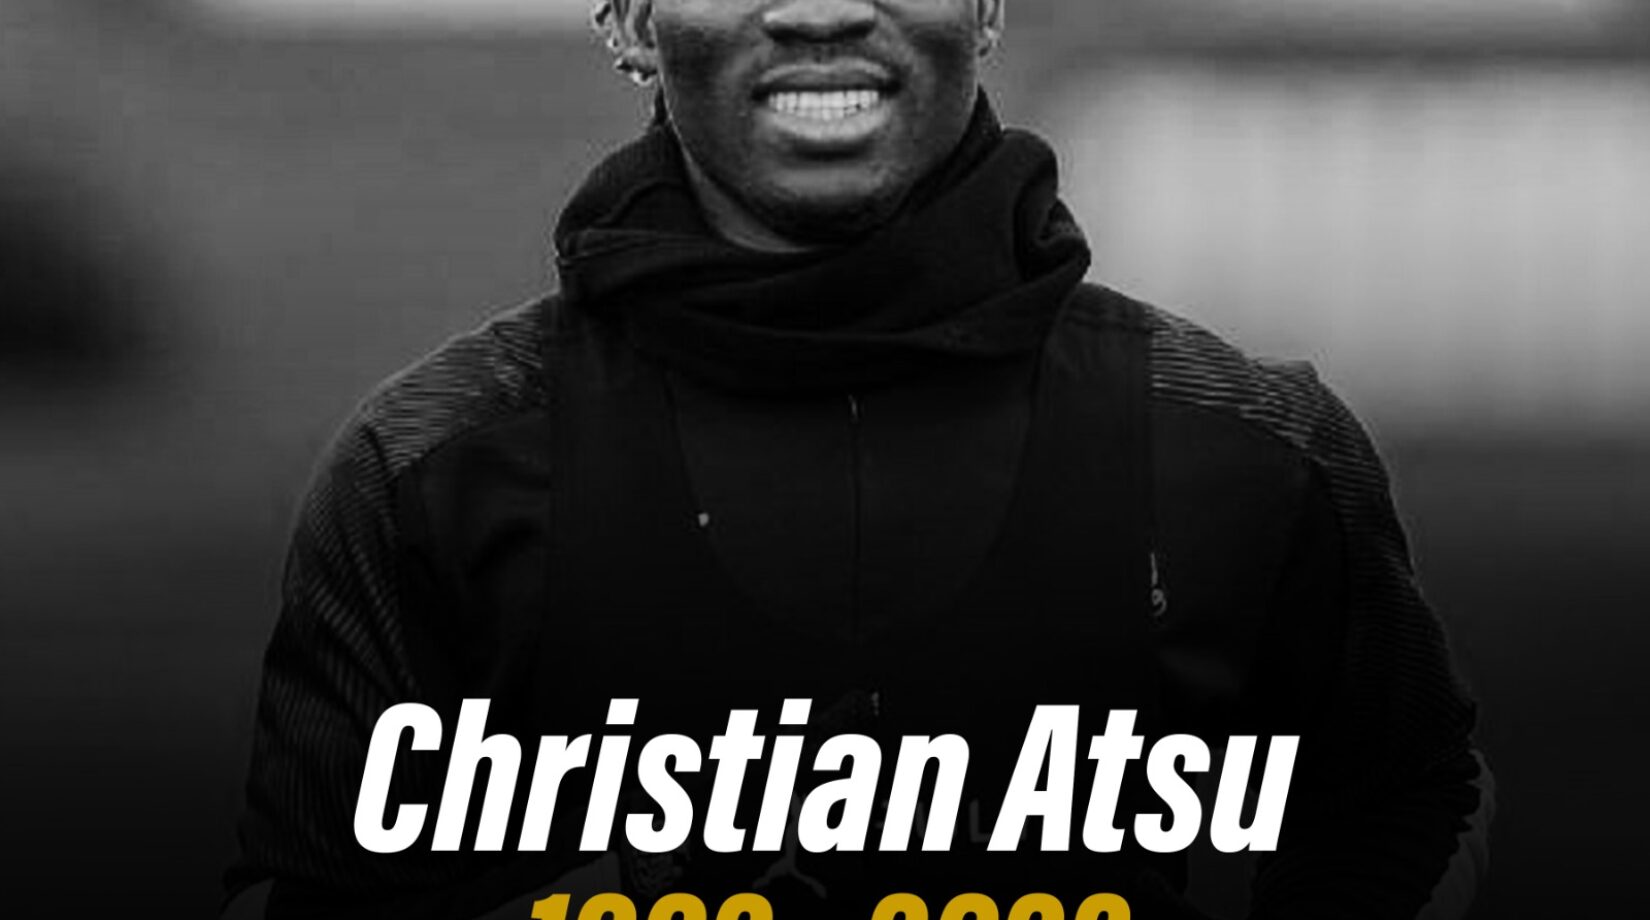 NSA SENDS MESSAGE OF CONDOLENCES TO FAMILY OF CHRISTIAN ATSU & SPORTS FRATERNITY